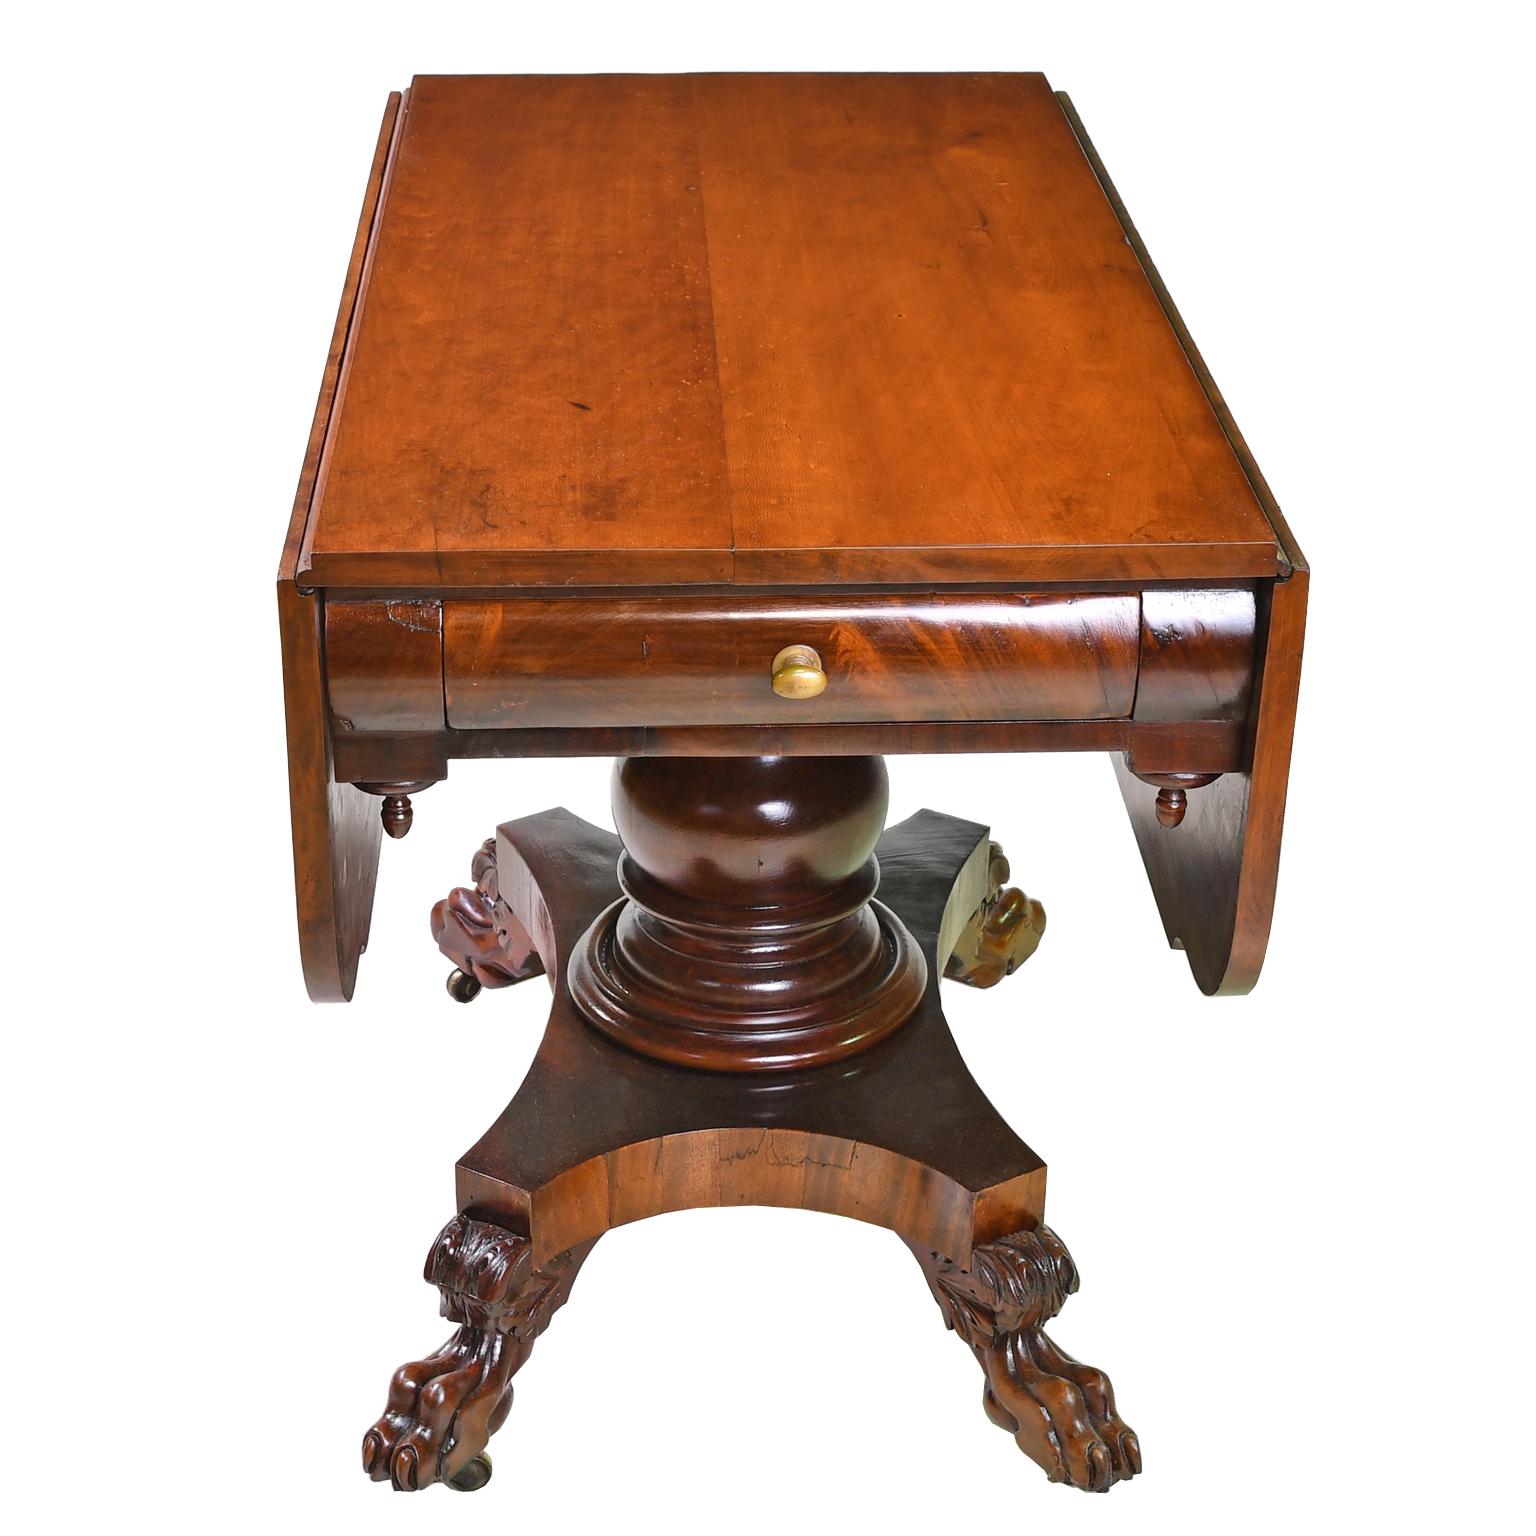 Polished Early American Empire Drop-Leaf/ Pembroke Table in West Indies Mahogany, c. 1830 For Sale